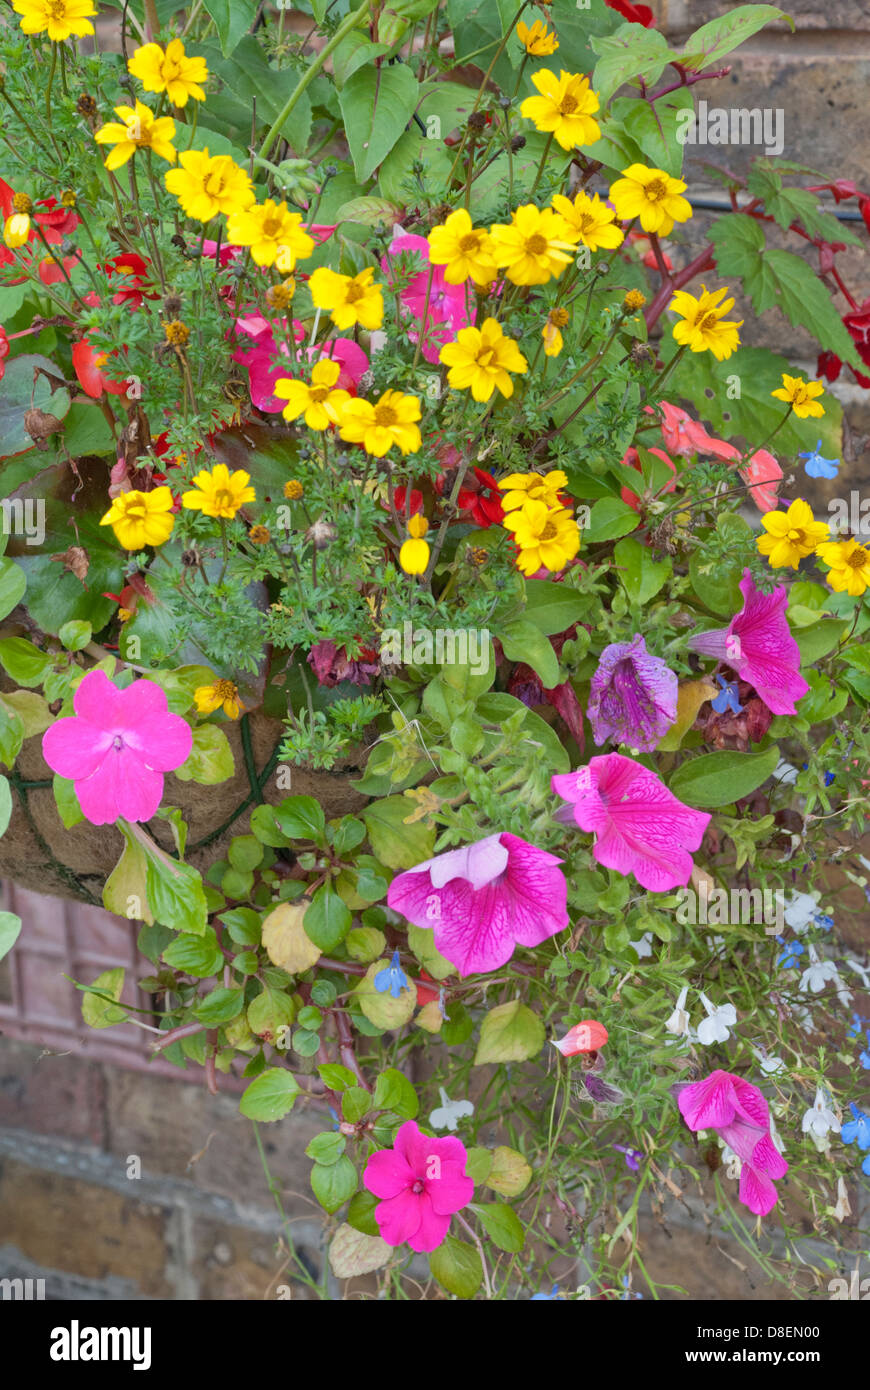 French marigolds and petunias in a hanging basket Stock Photo